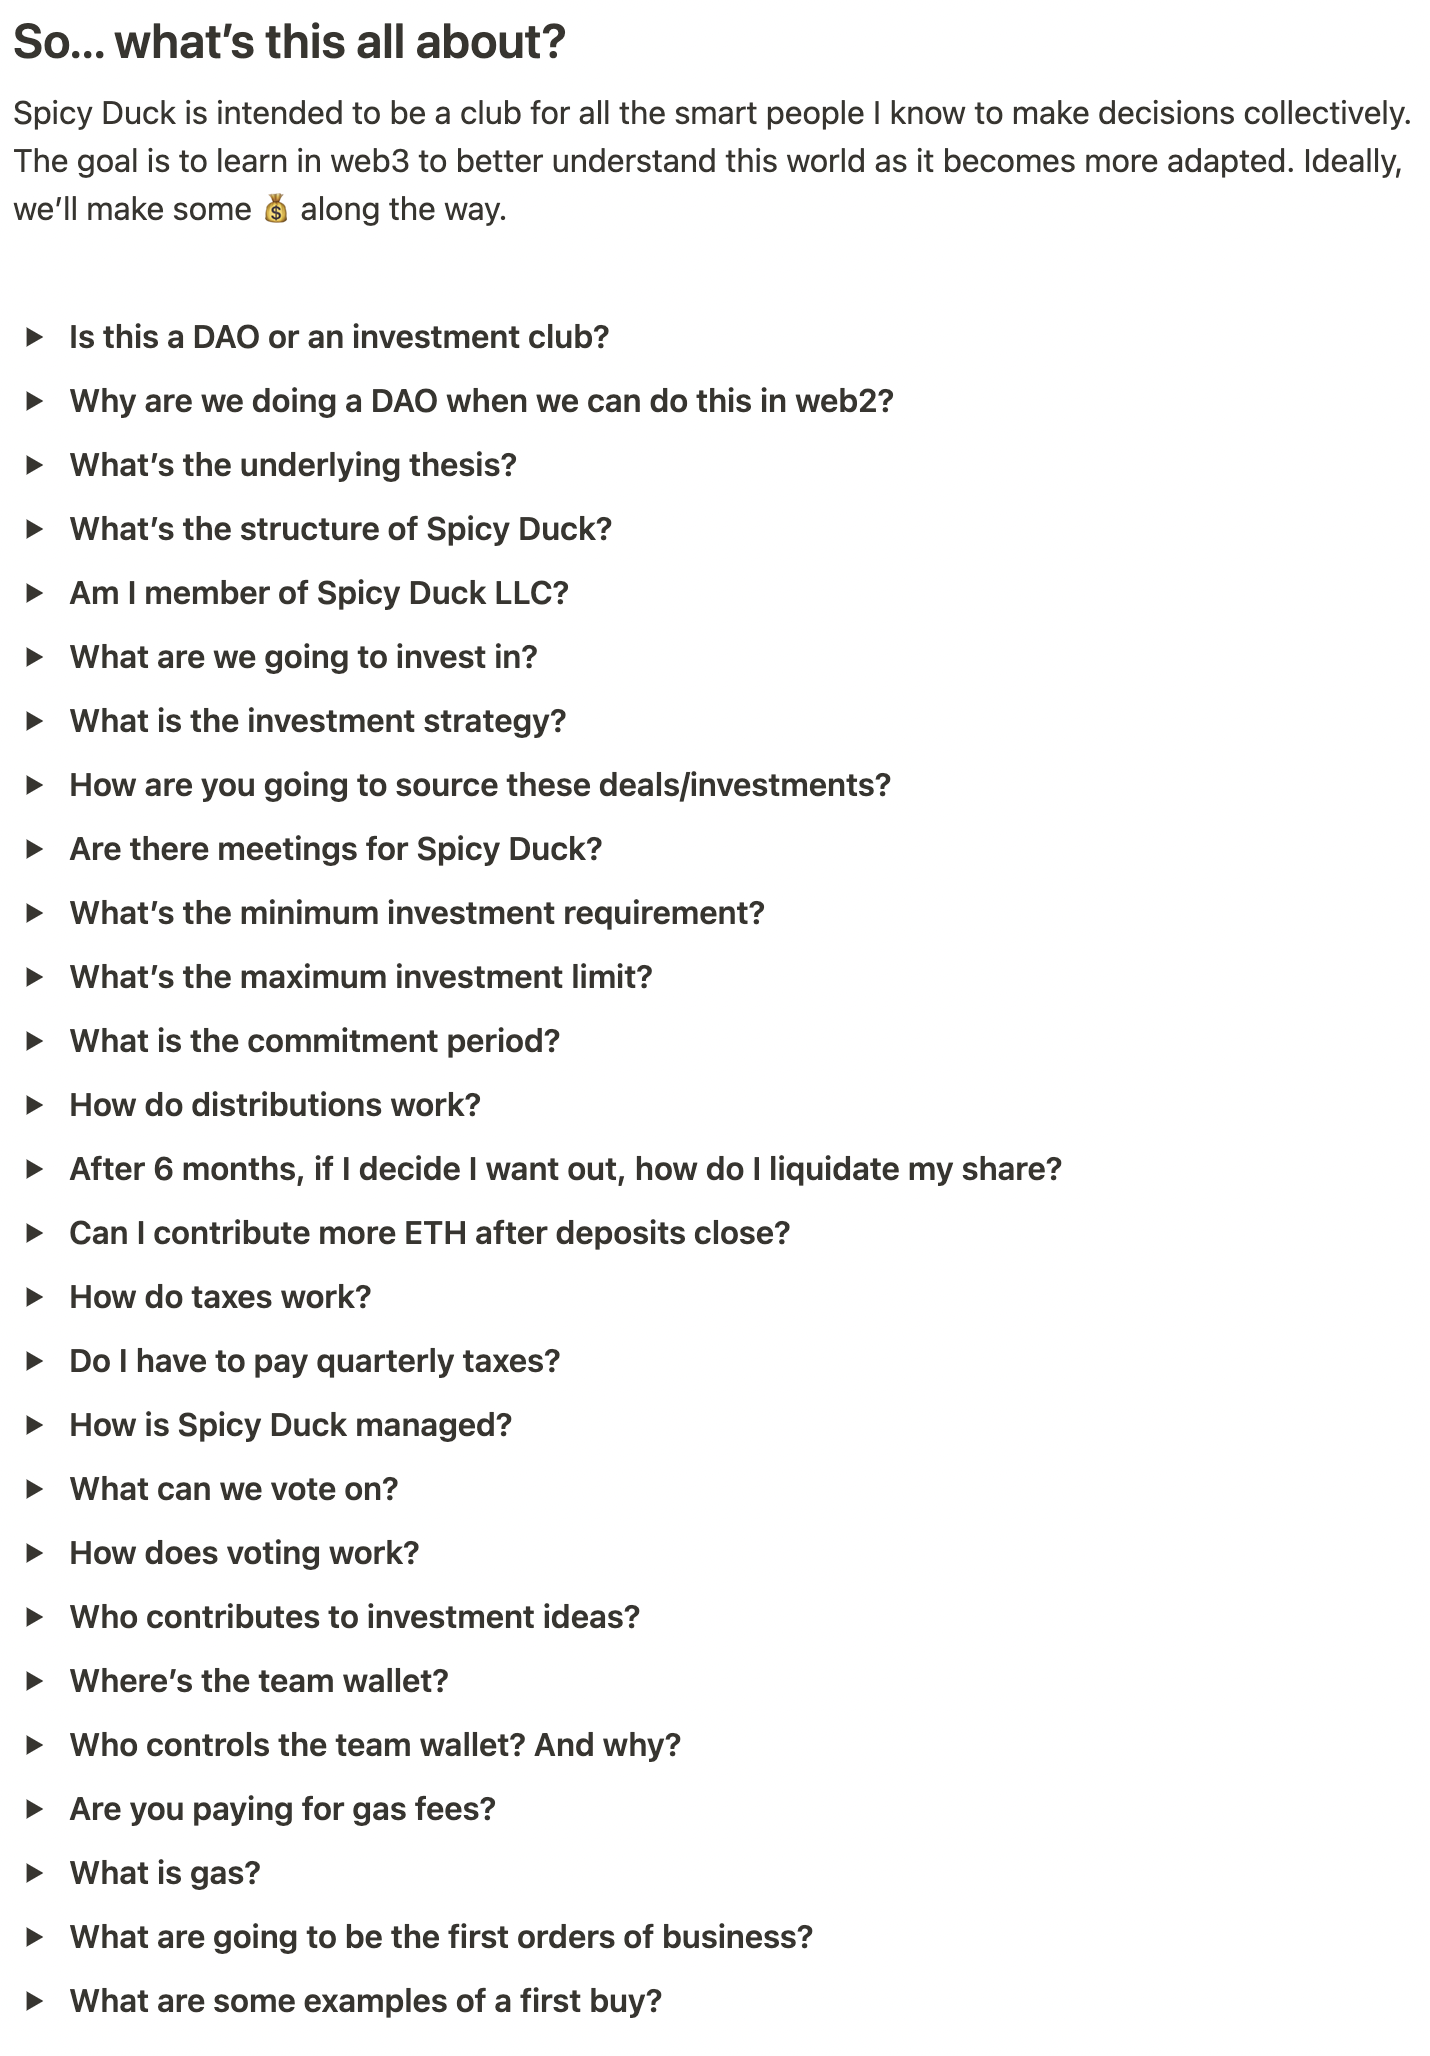 A screenshot of the laundry list of FAQs I put together in anticipation of getting people on board.